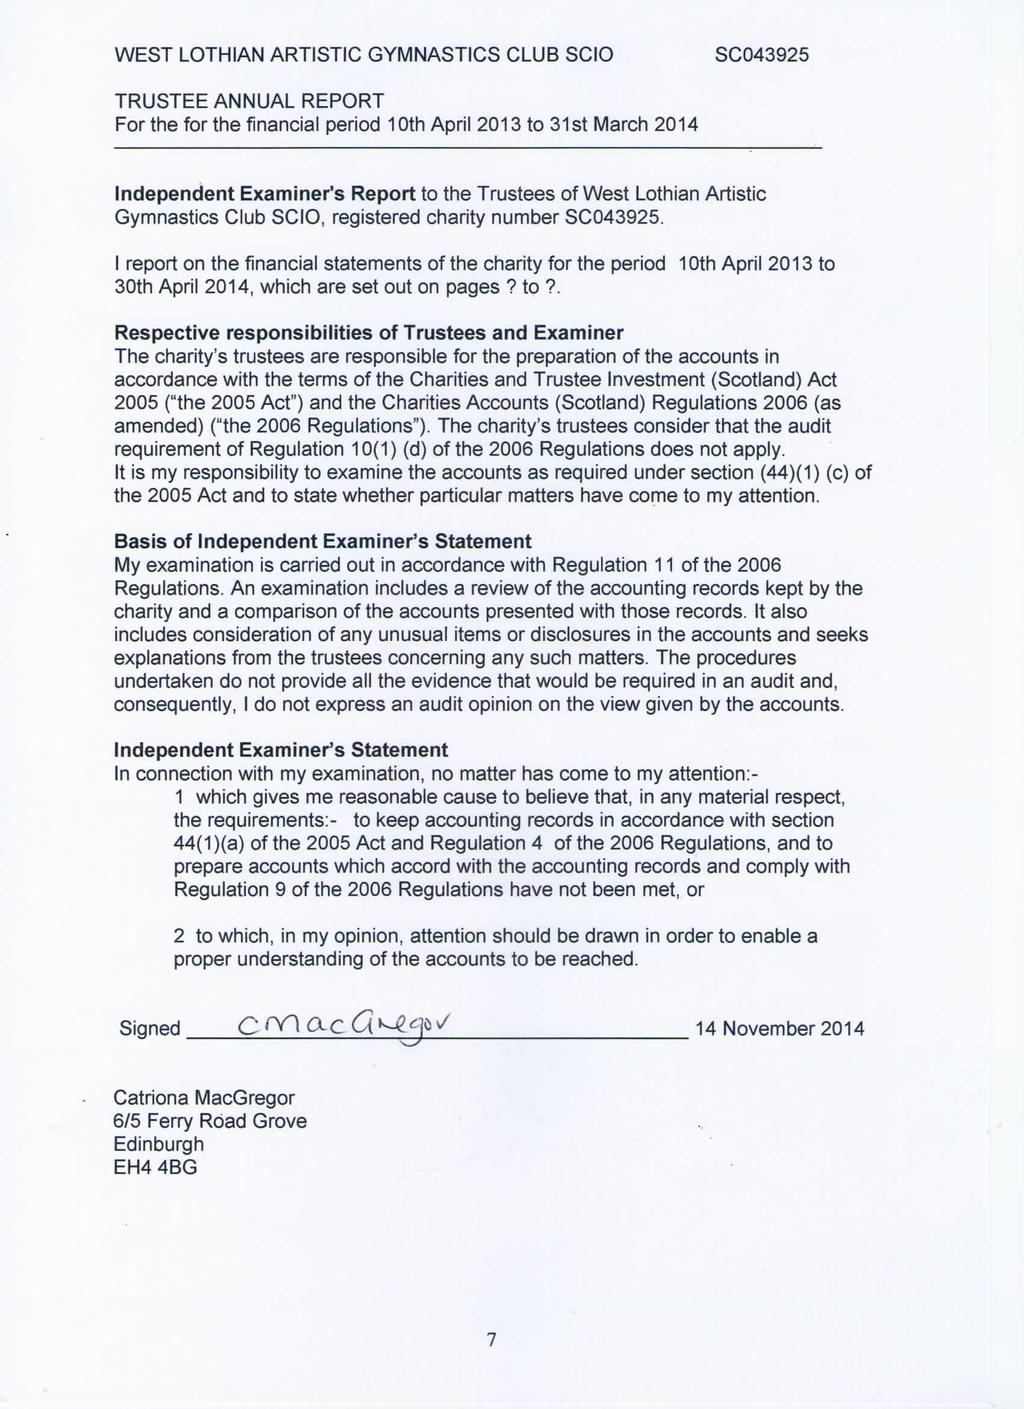 Independent Examiner's Report to the Trustees of West Lothian Artistic Gymnastics Club SCIO, registered charity number.